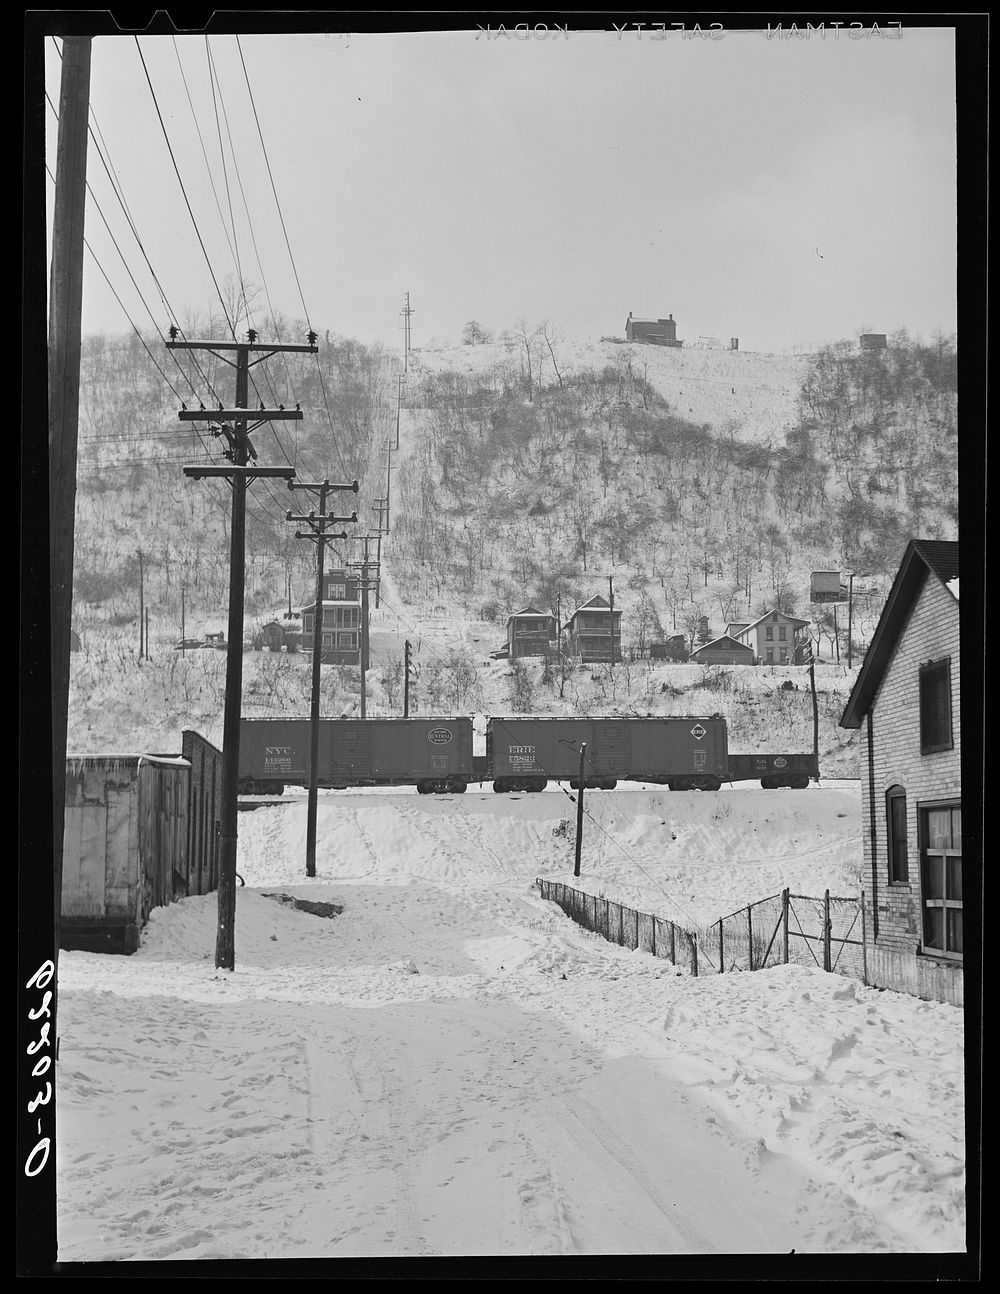 West Aliquippa, Pennsylvania. Sourced from the Library of Congress.